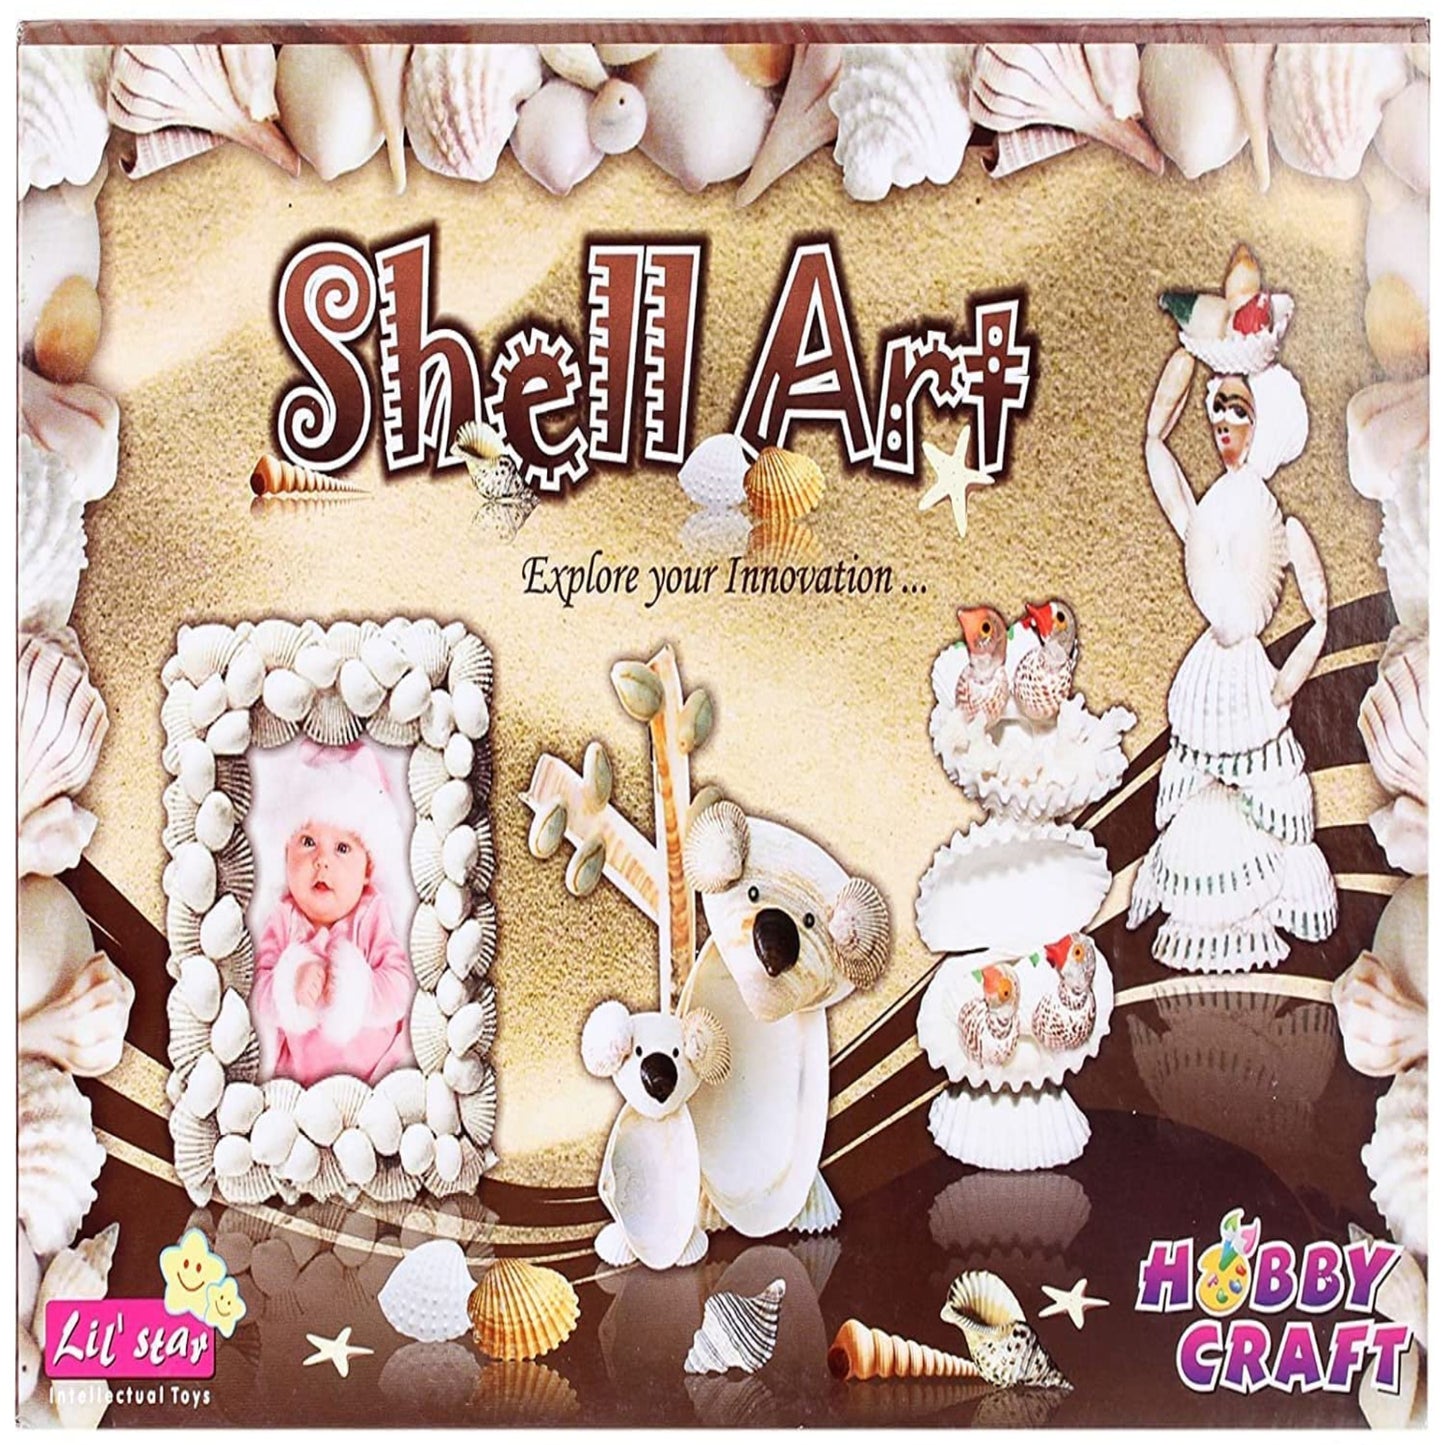 Shell art , a learning activity craft game for kids